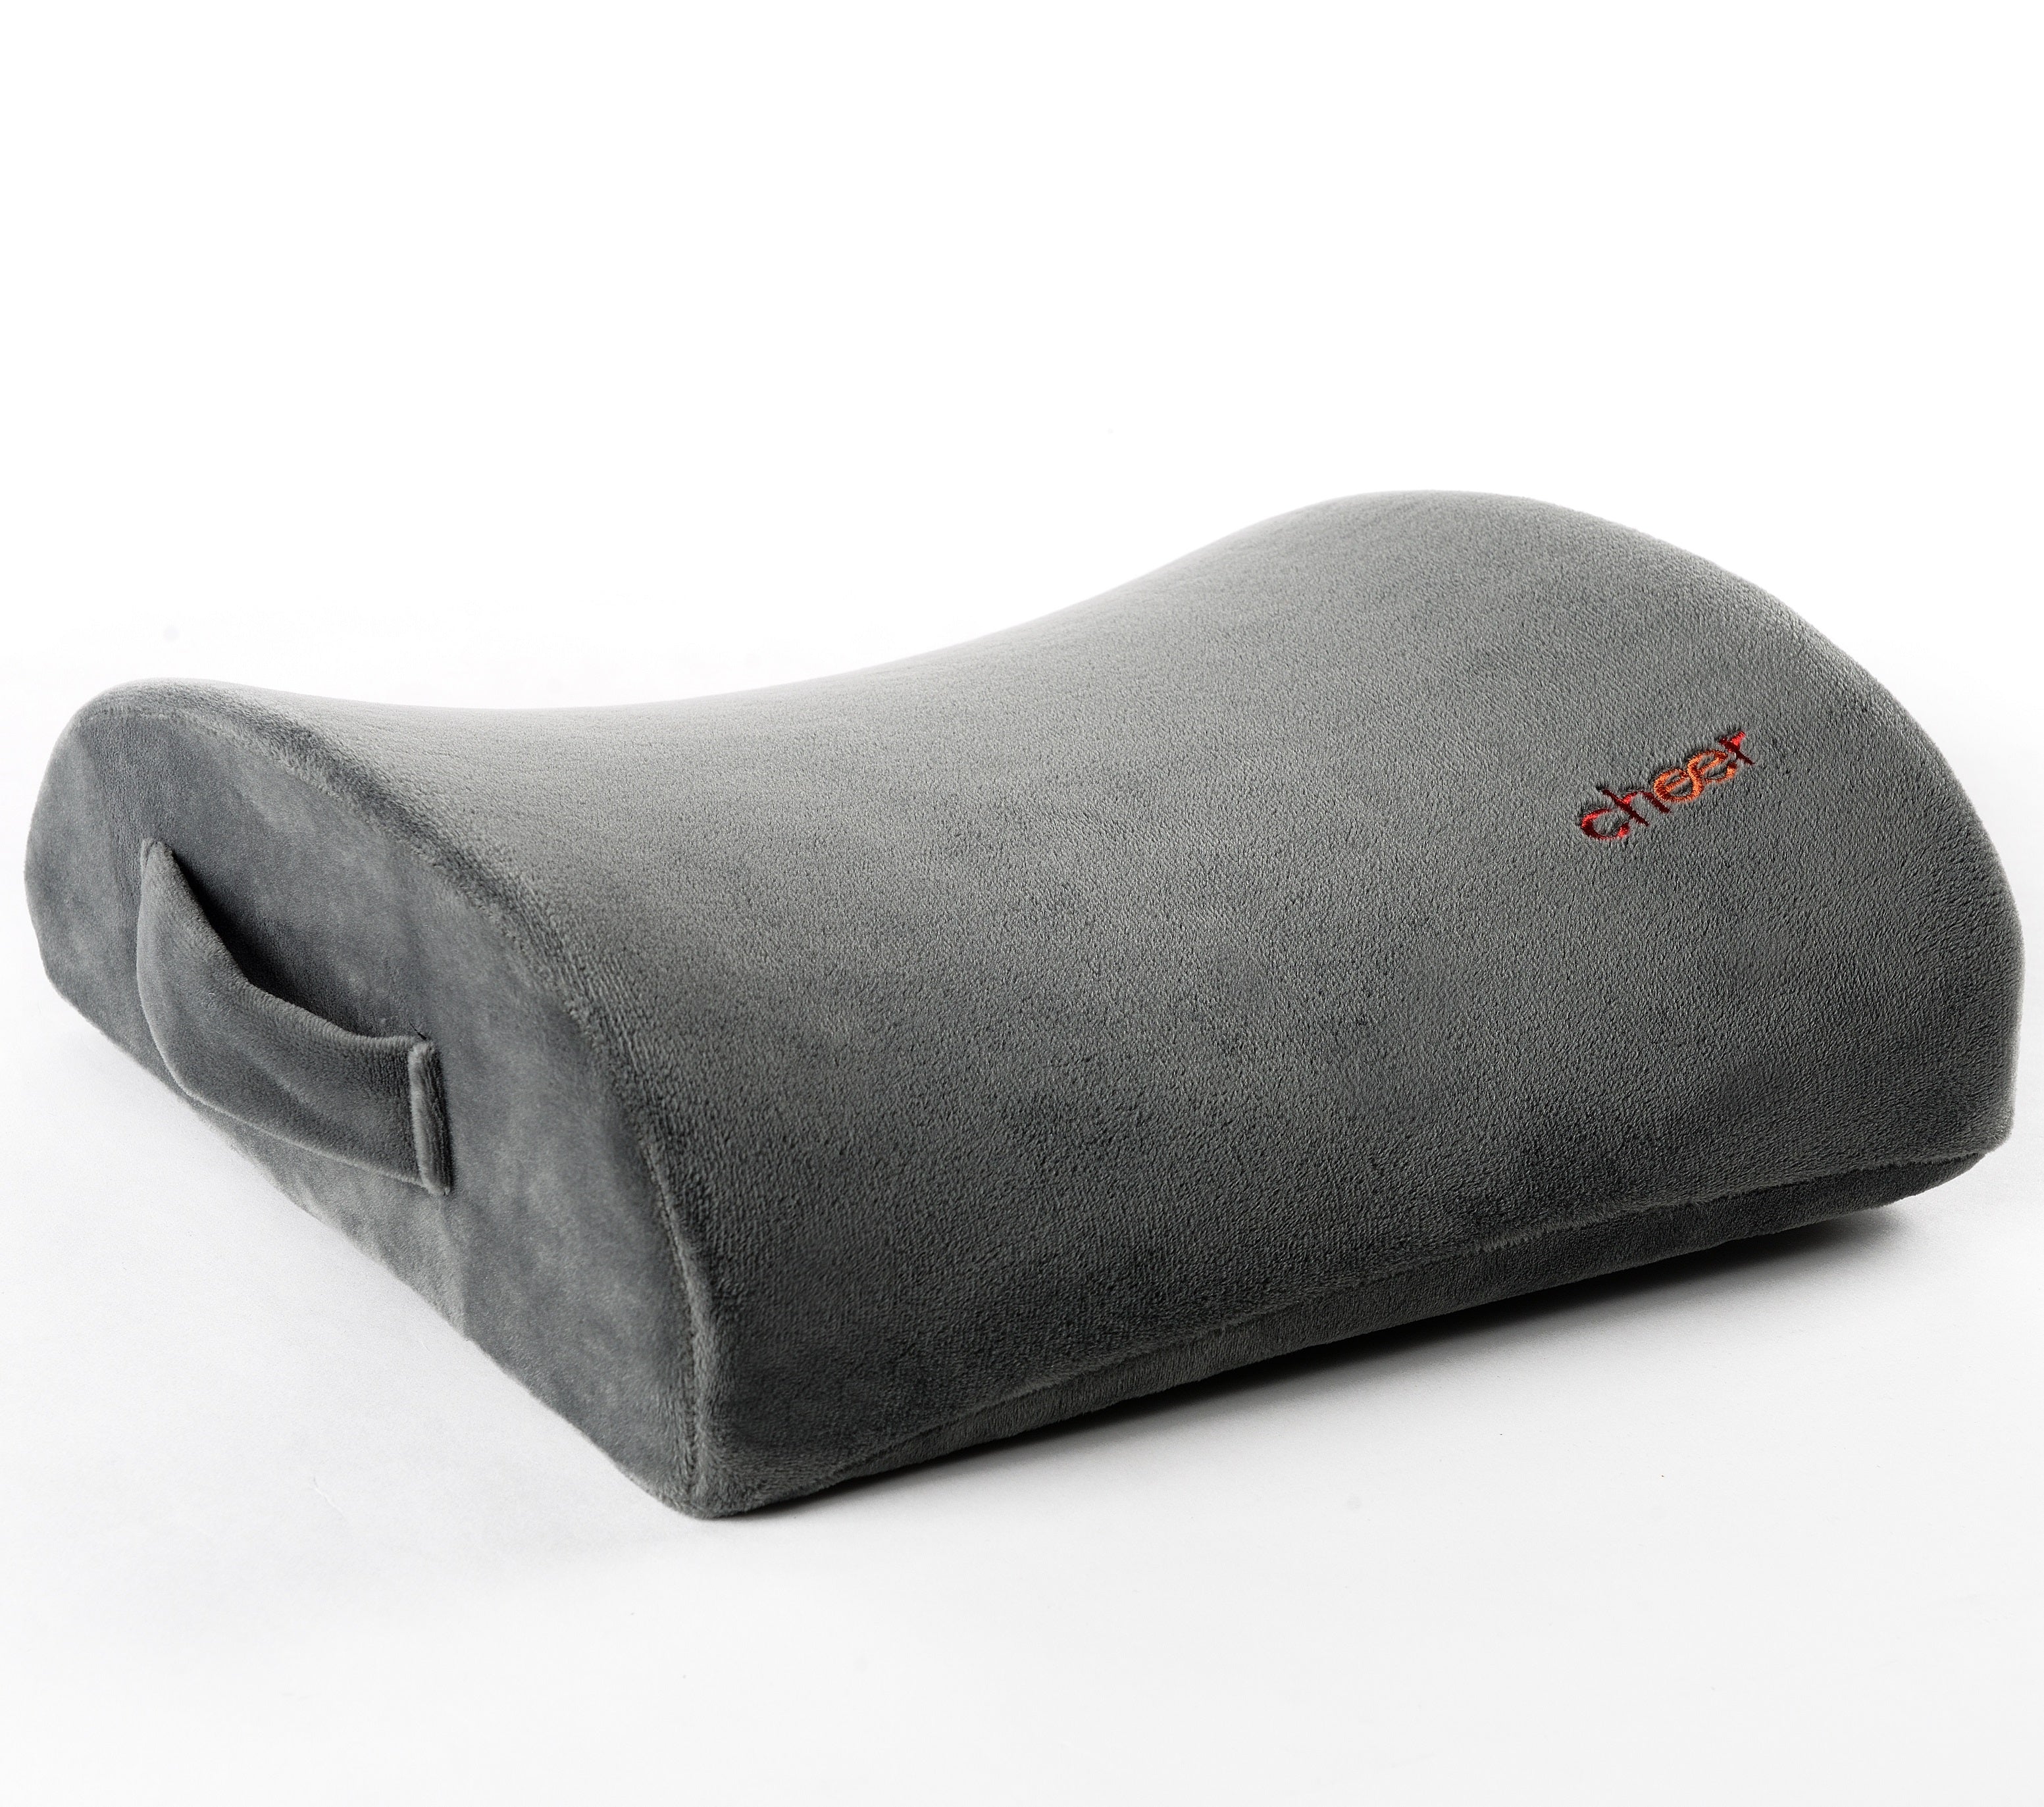 https://cdn.shopify.com/s/files/1/2091/6511/products/cheer-collection-memory-foam-lumbar-cushion-for-lower-back-pain-relief-and-support-pillow-893222.jpg?v=1671779513